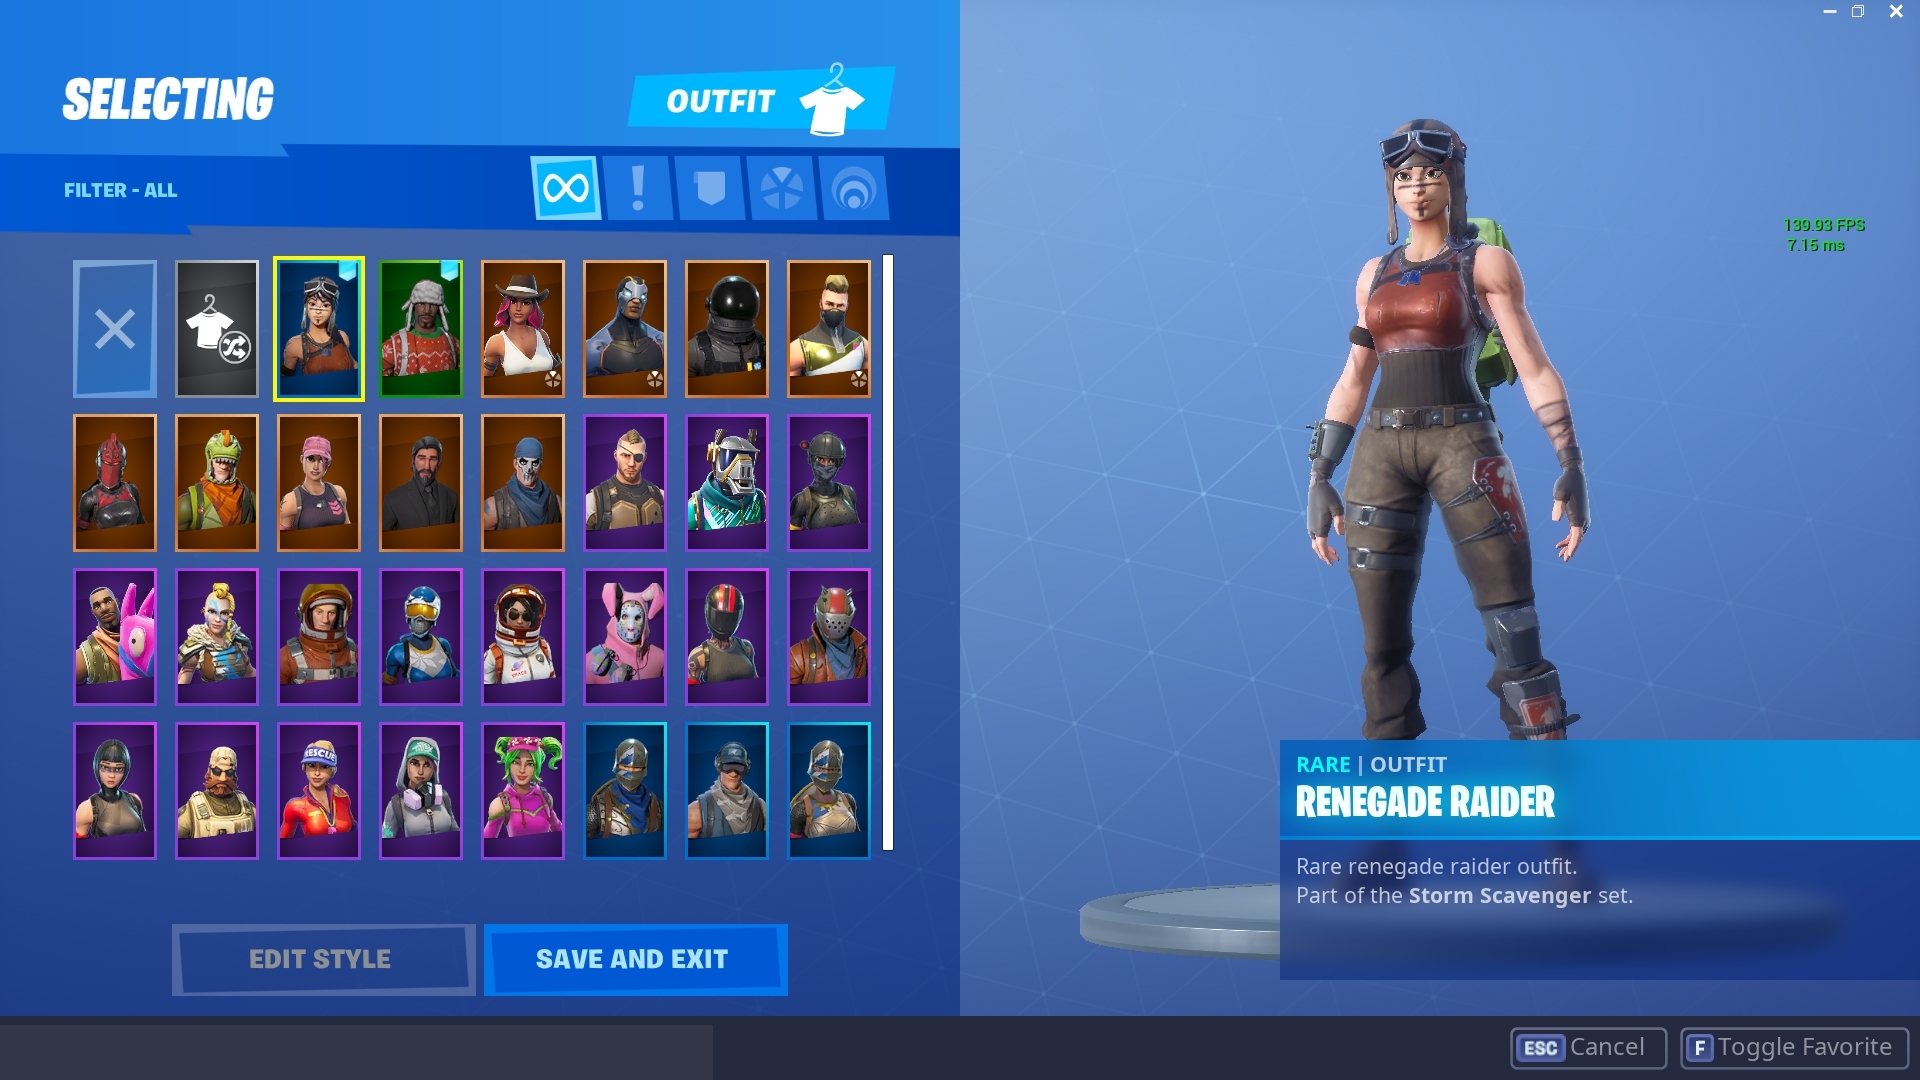 Sold - Fortnite PC/PS4 account renegade raider | PlayerUp ...